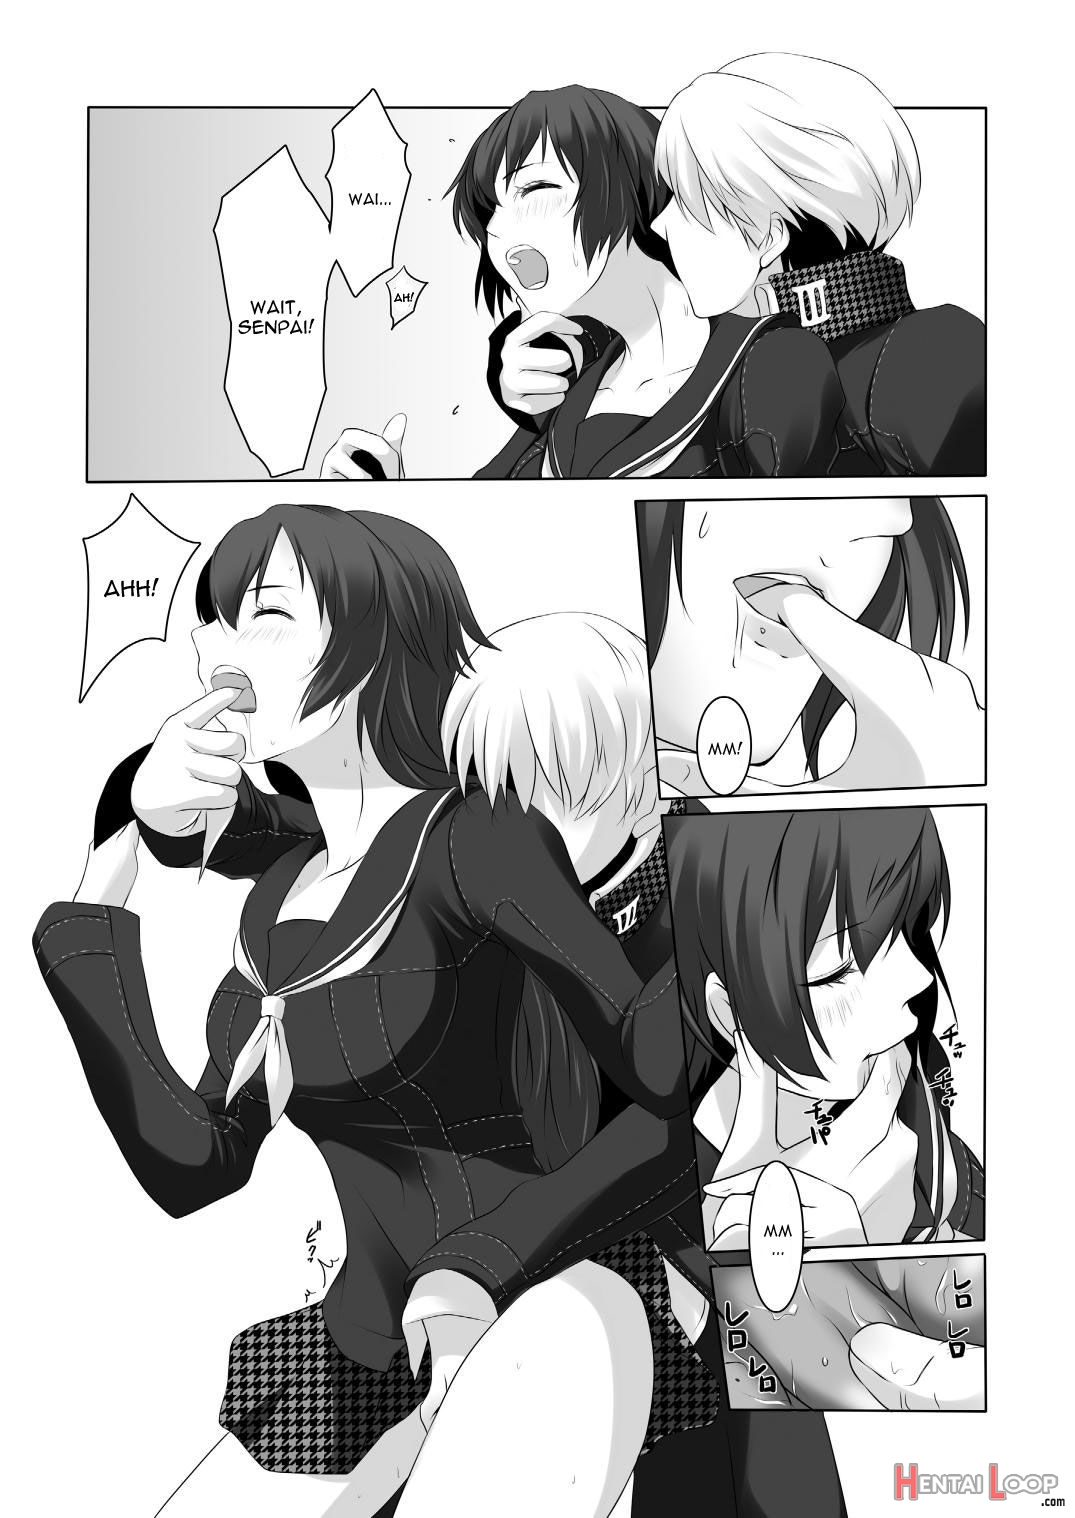 Persona 4 : The Doujin #3 #4 page 7